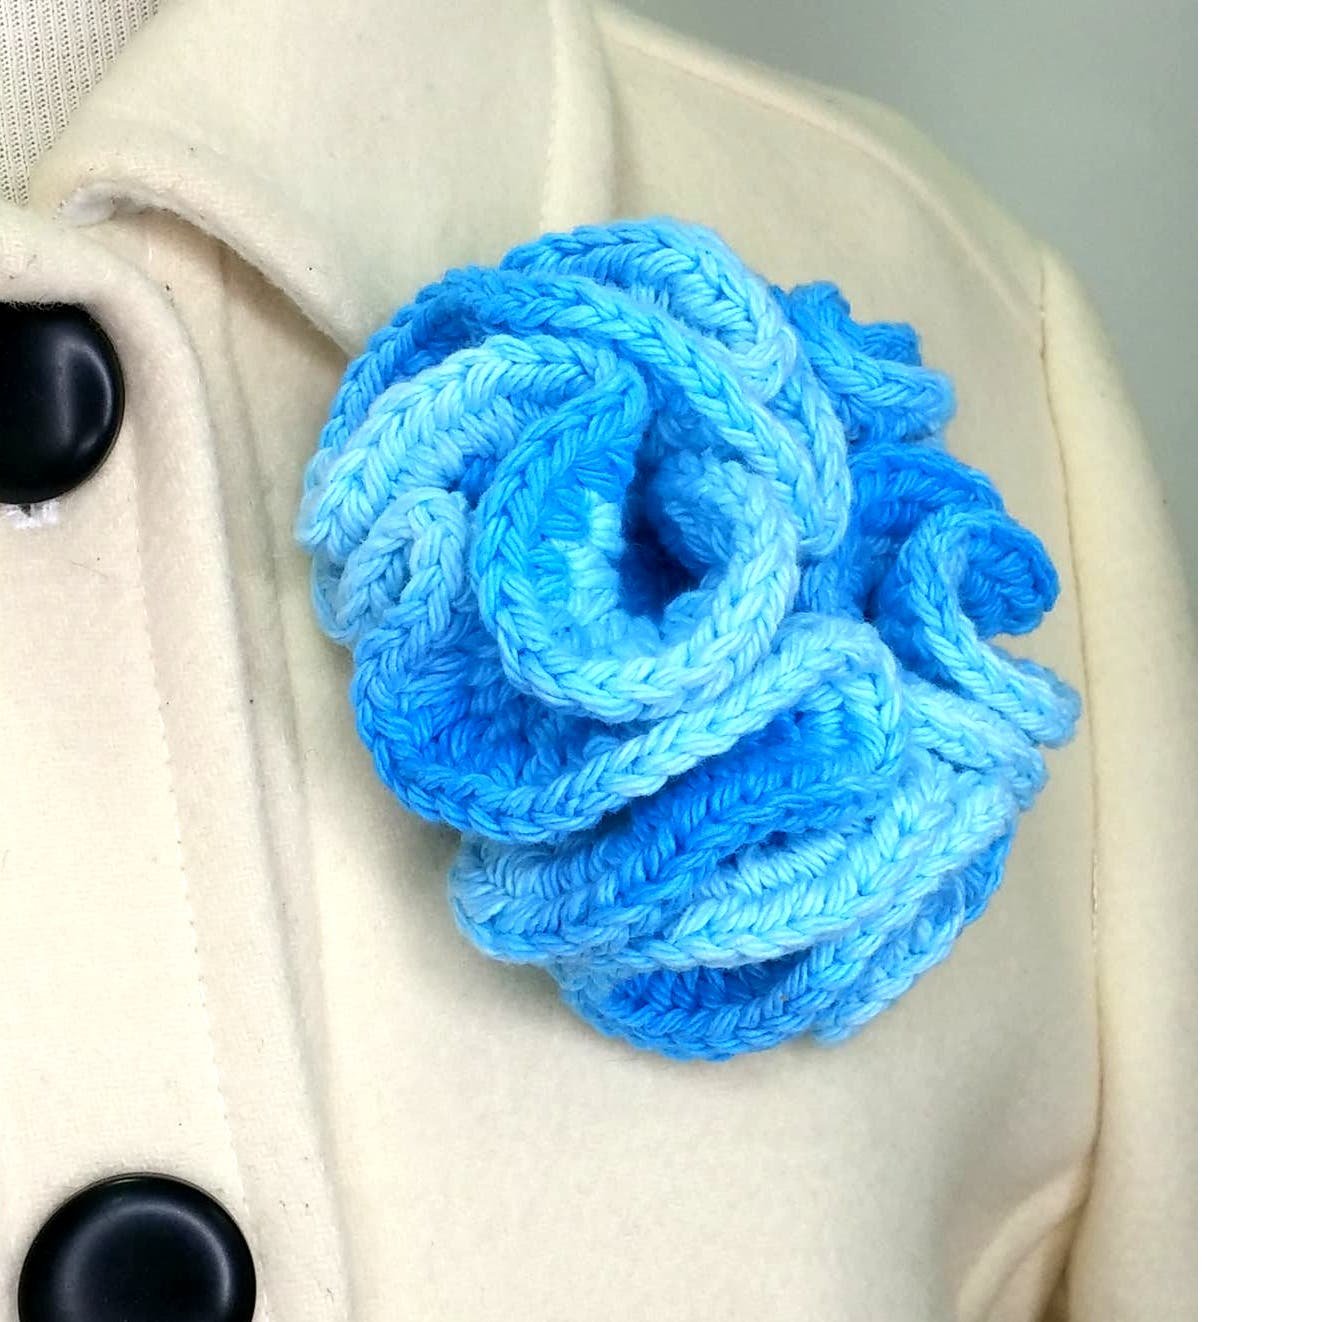 Hand Crafted Swirly Crochet Brooch Bright Caribbean Blue Floral Swirly Coat Pin AW5WW5MBk